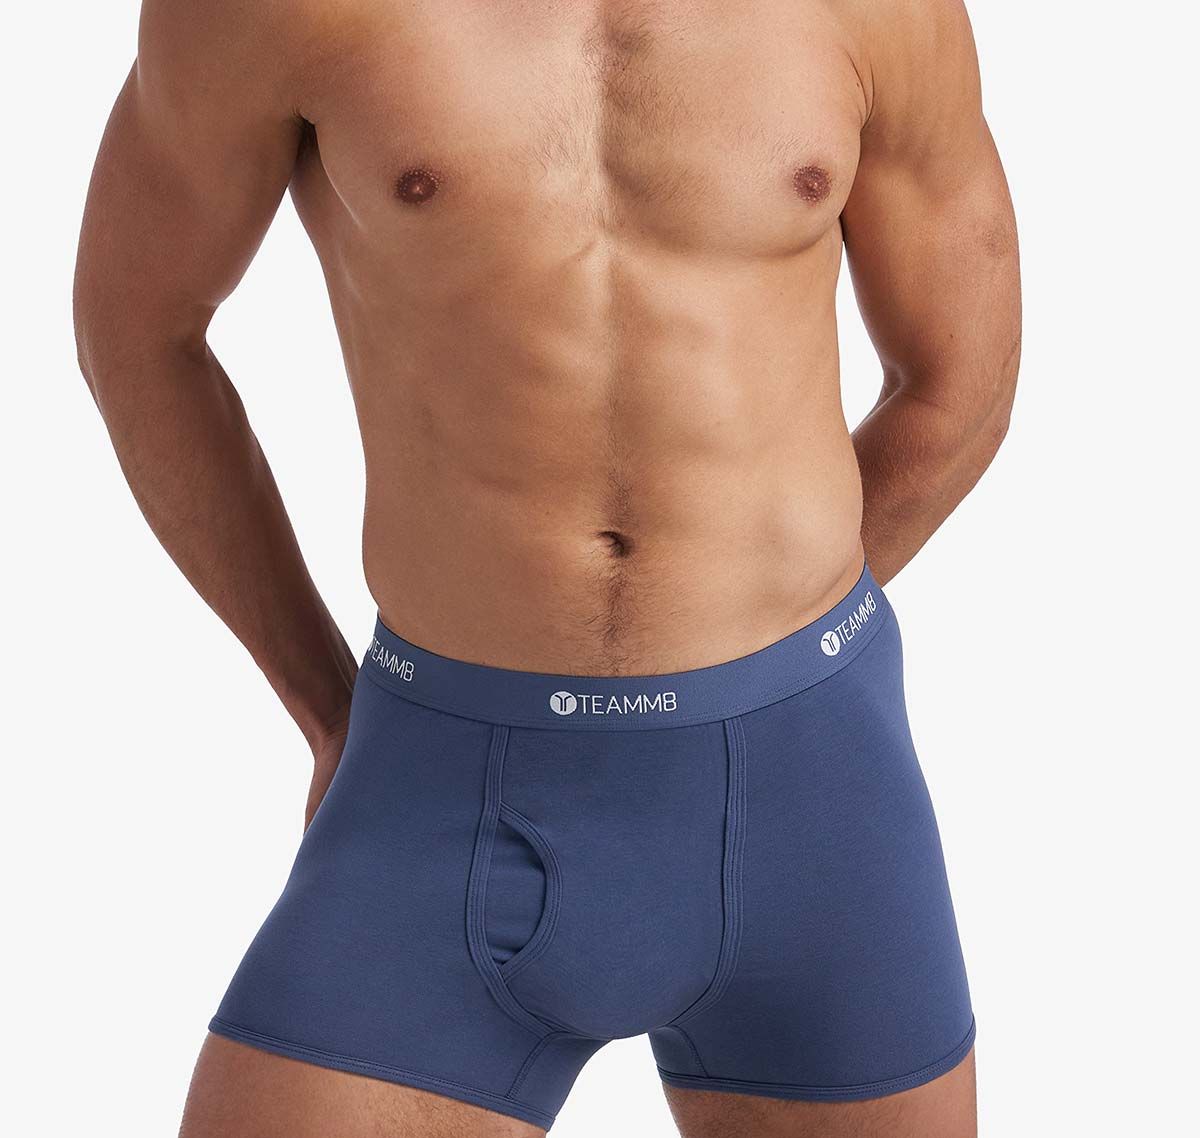 TEAMM8 Boxers CLASSIC COTTON TRUNK, navy